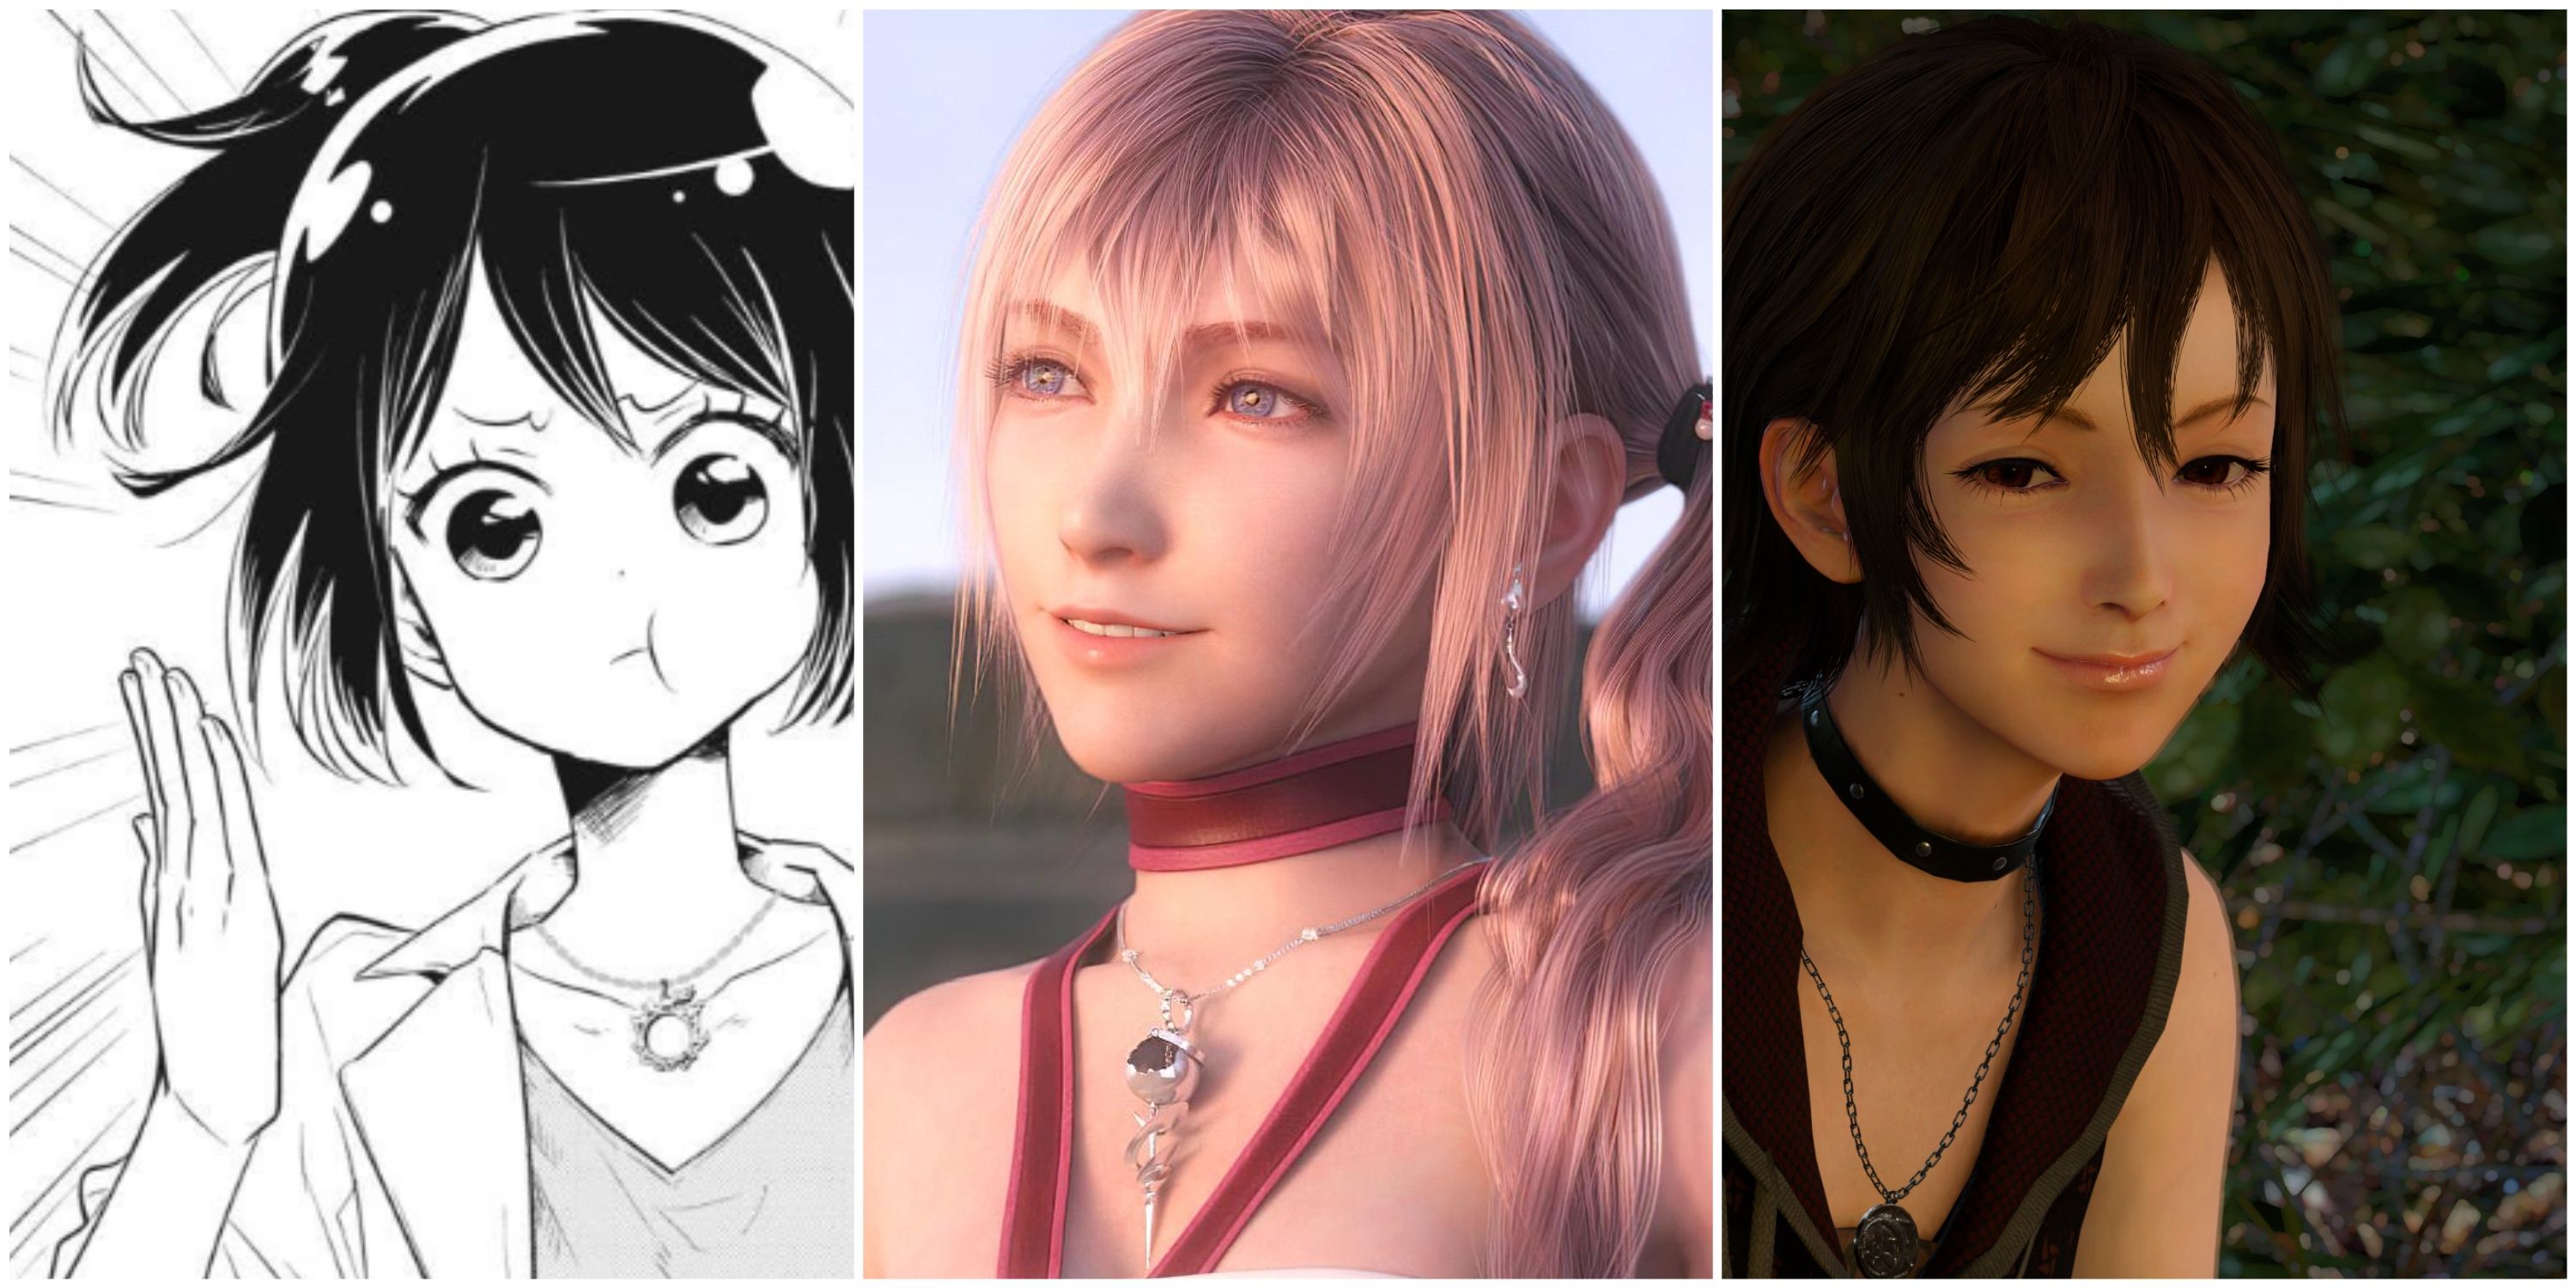 Final Fantasy: Worst Sisters in the Series